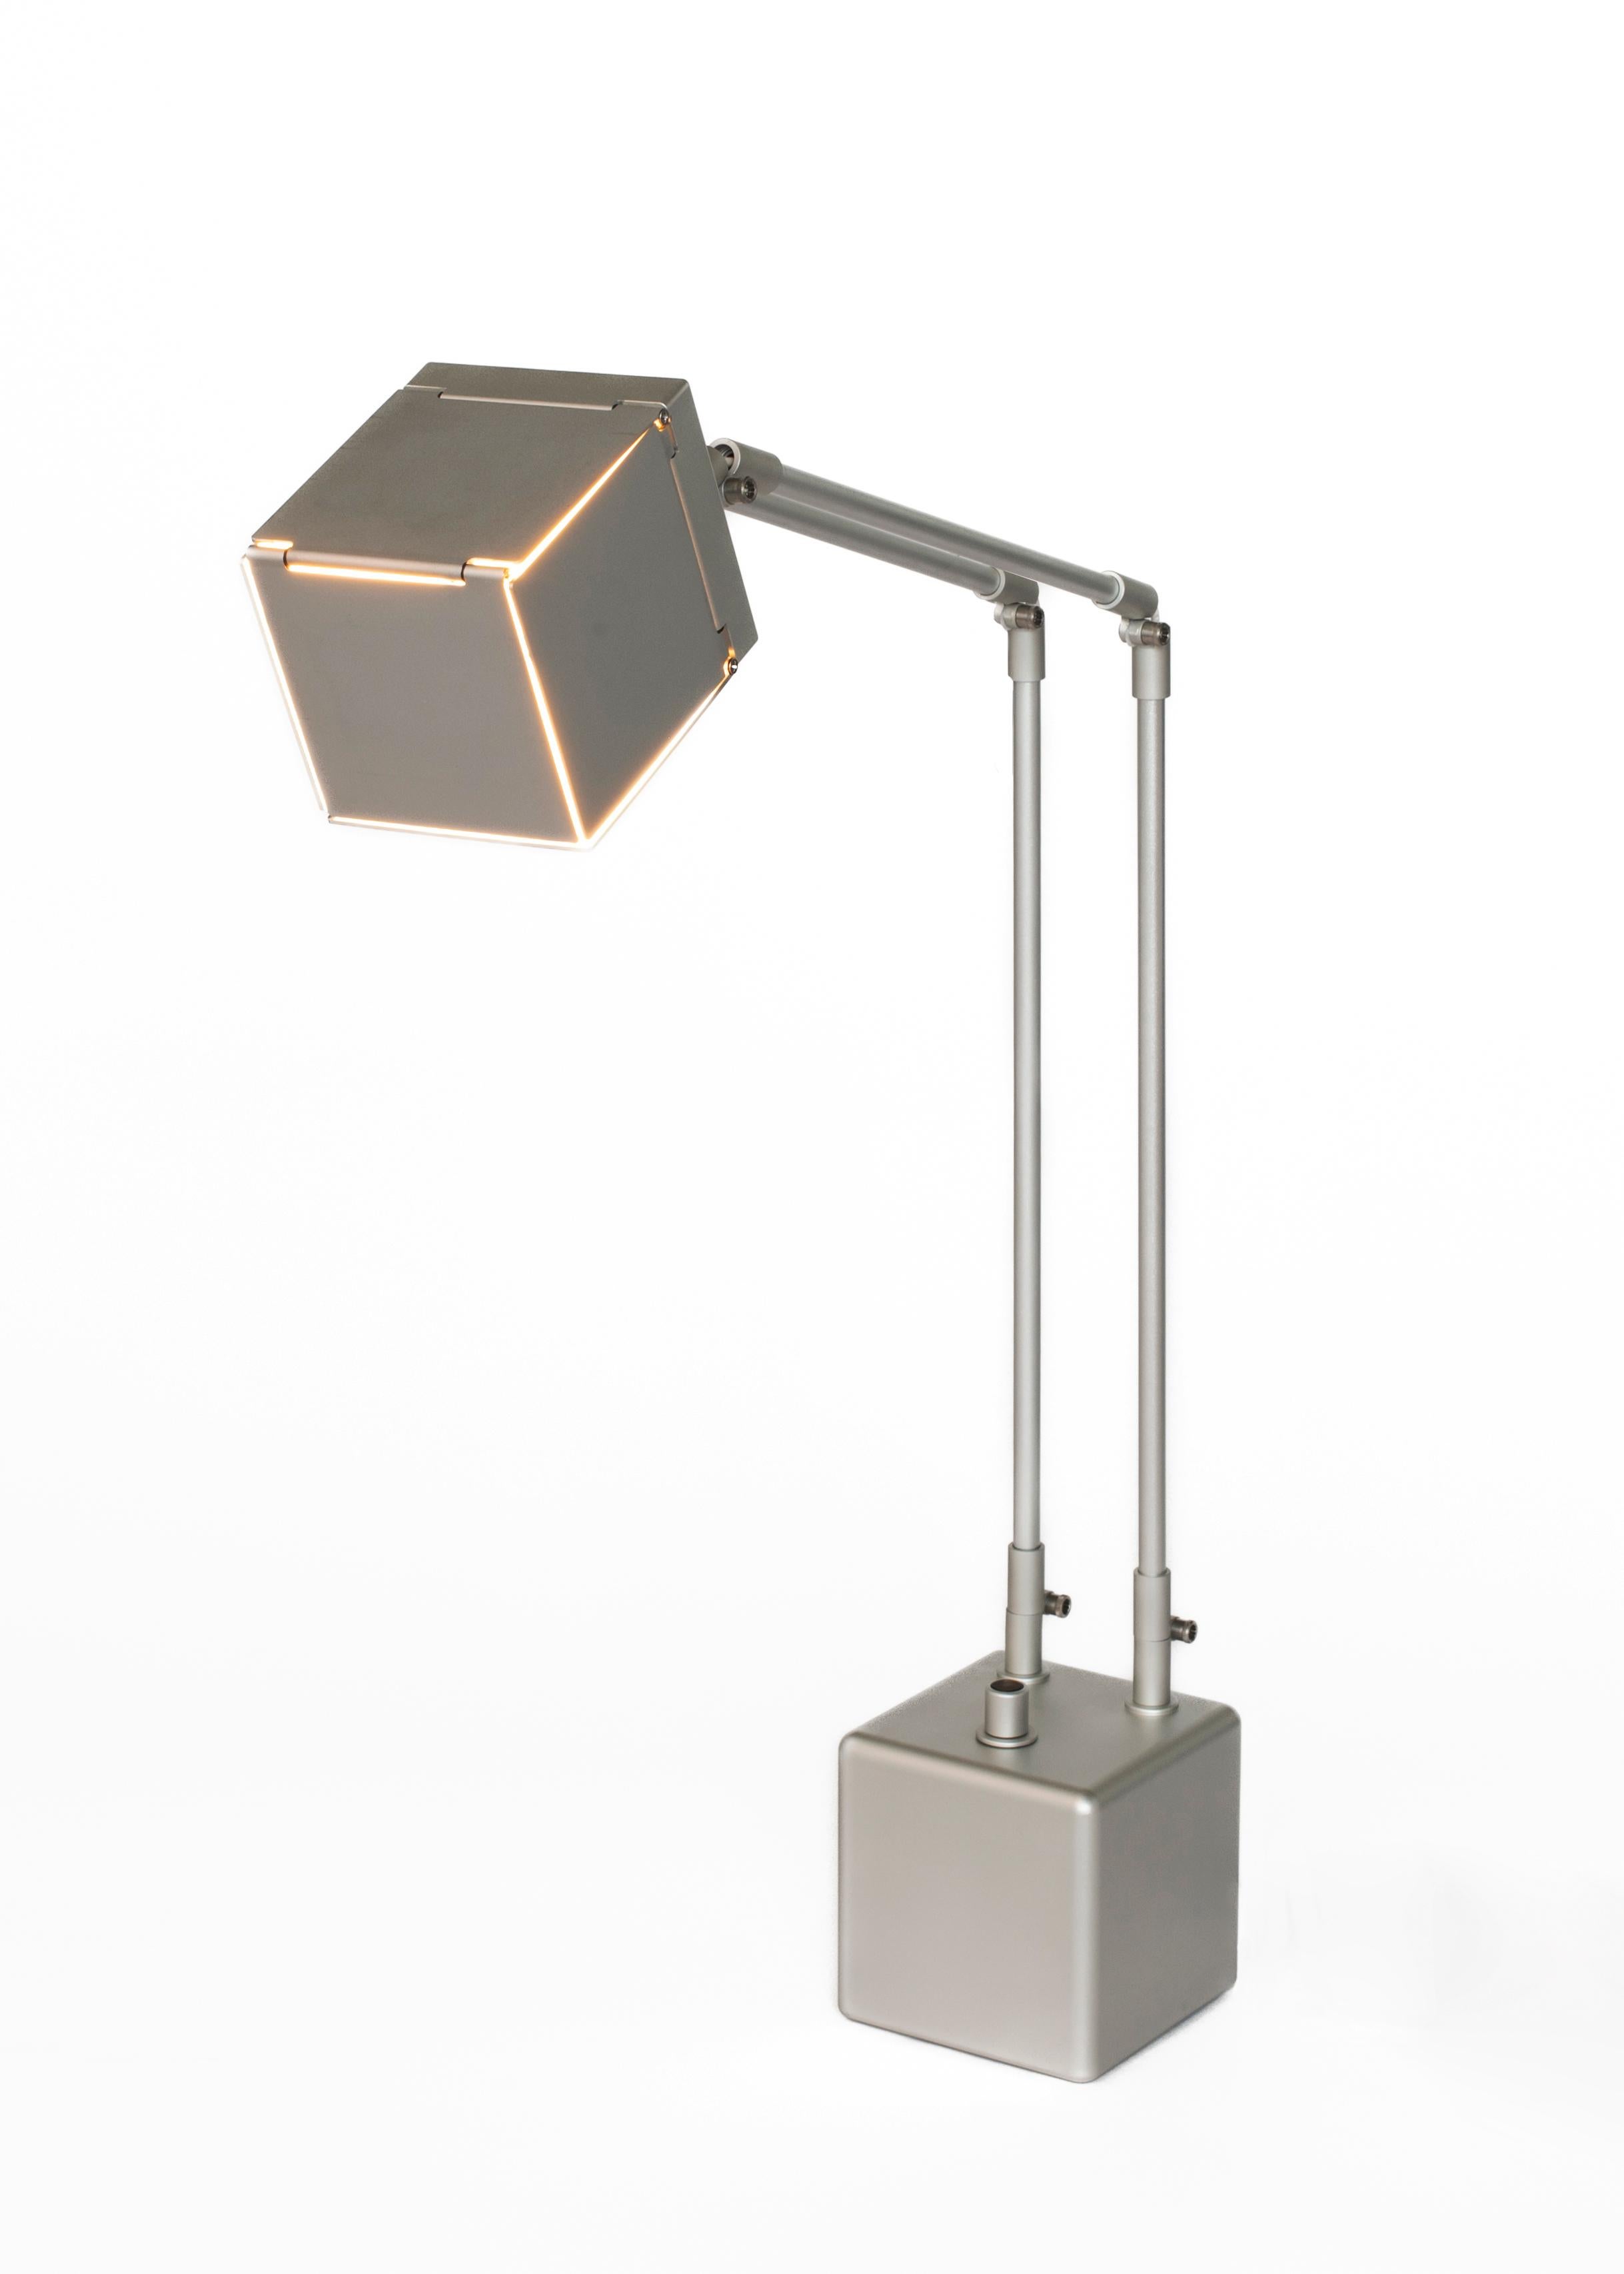 The Téssara Aktís Desk Lamp highlights the deceptive complexity of a cube. When folded and closed, its edges are illuminated. When opened, the light is revealed and reflects upon its interior mirror-polished faces. Through its various forms, it